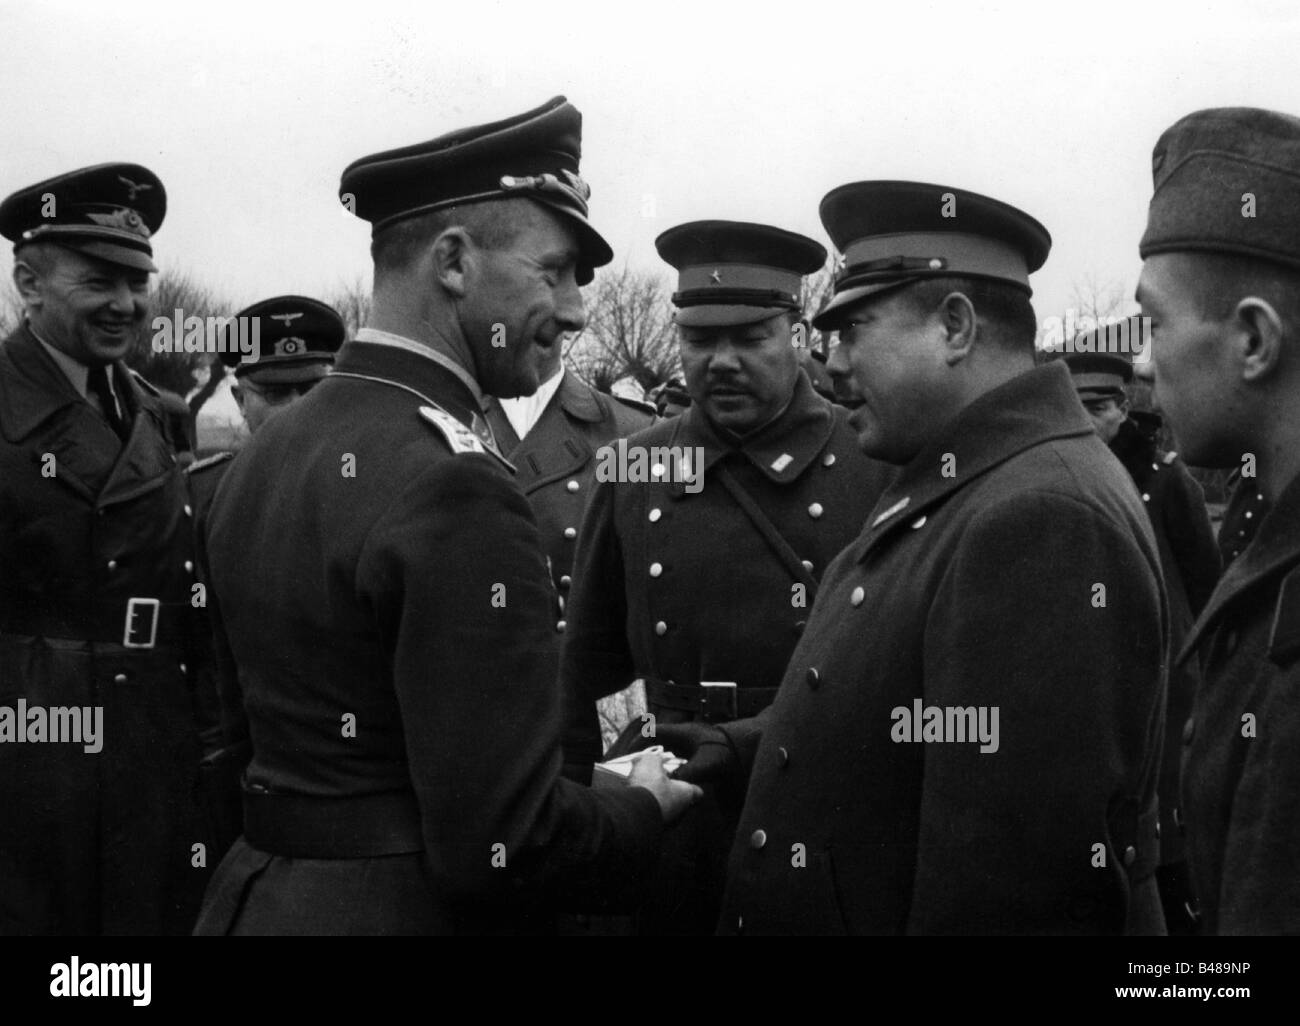 Nazism / National Socialism, politics, Tripartite Pact, visit of Japanese General Yamashita at German airforce 53, France, late 1942, greeting, Yamashita Tomoyuri, commander-in-chief of Japanese forces in Manchuria, Pact of Steel, military, air force, officers, uniform, Nazi Germany, Japan, Third Reich, Wehrmacht, Alliance, KG 53, Second World War / WW II, historic, historical, 20th century, 1940s, people, Stock Photo